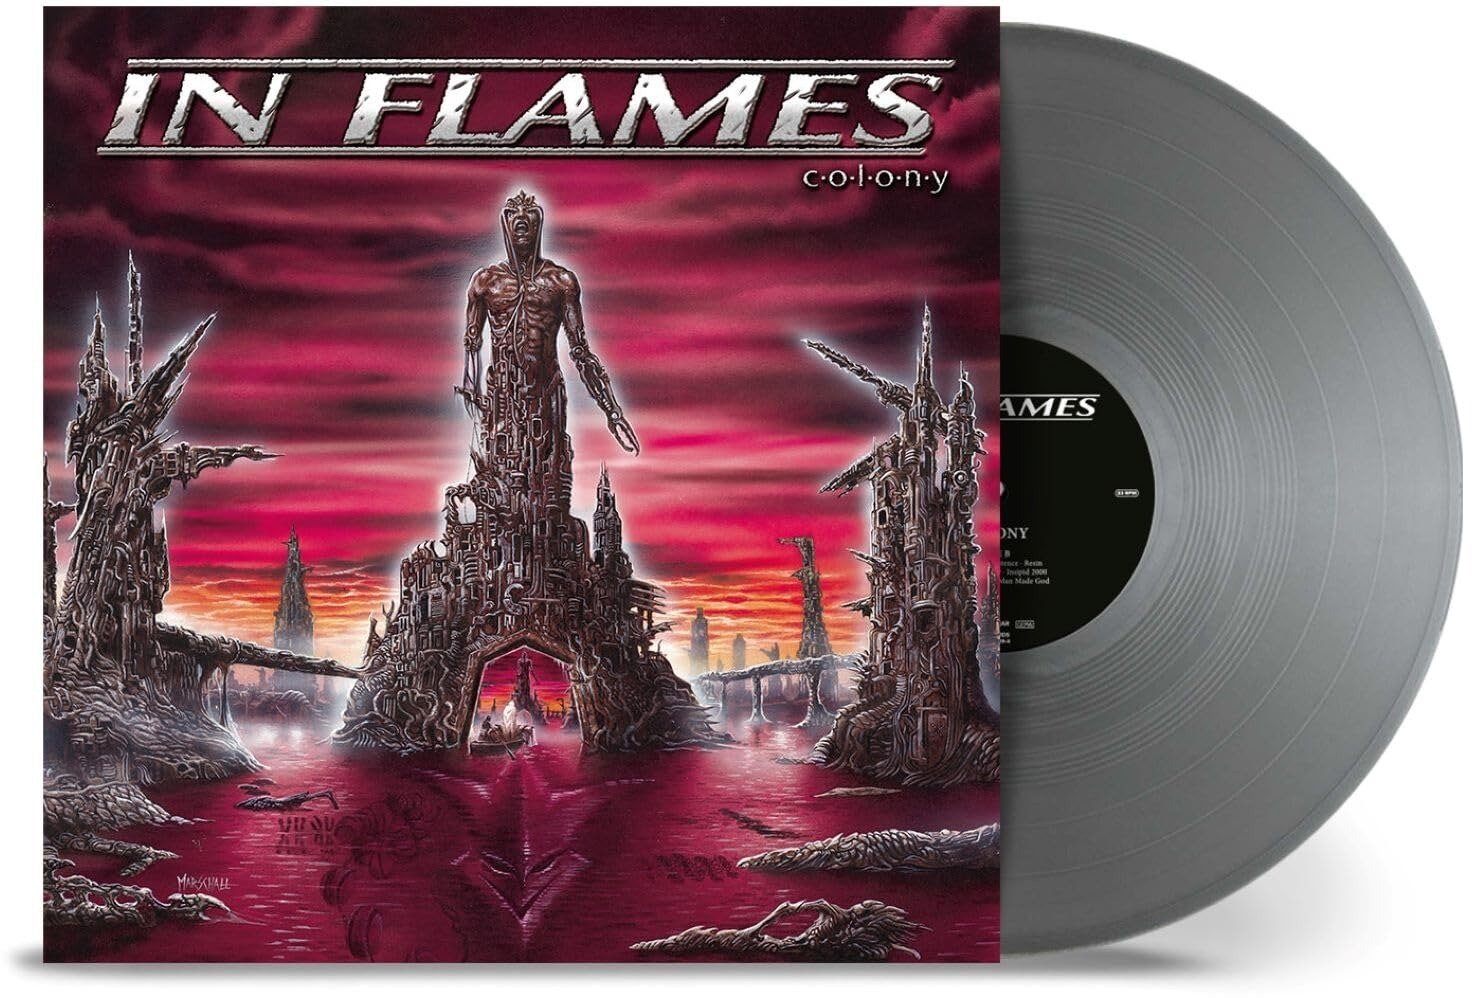 CD Shop - IN FLAMES COLONY (25TH ANNIVERSARY)